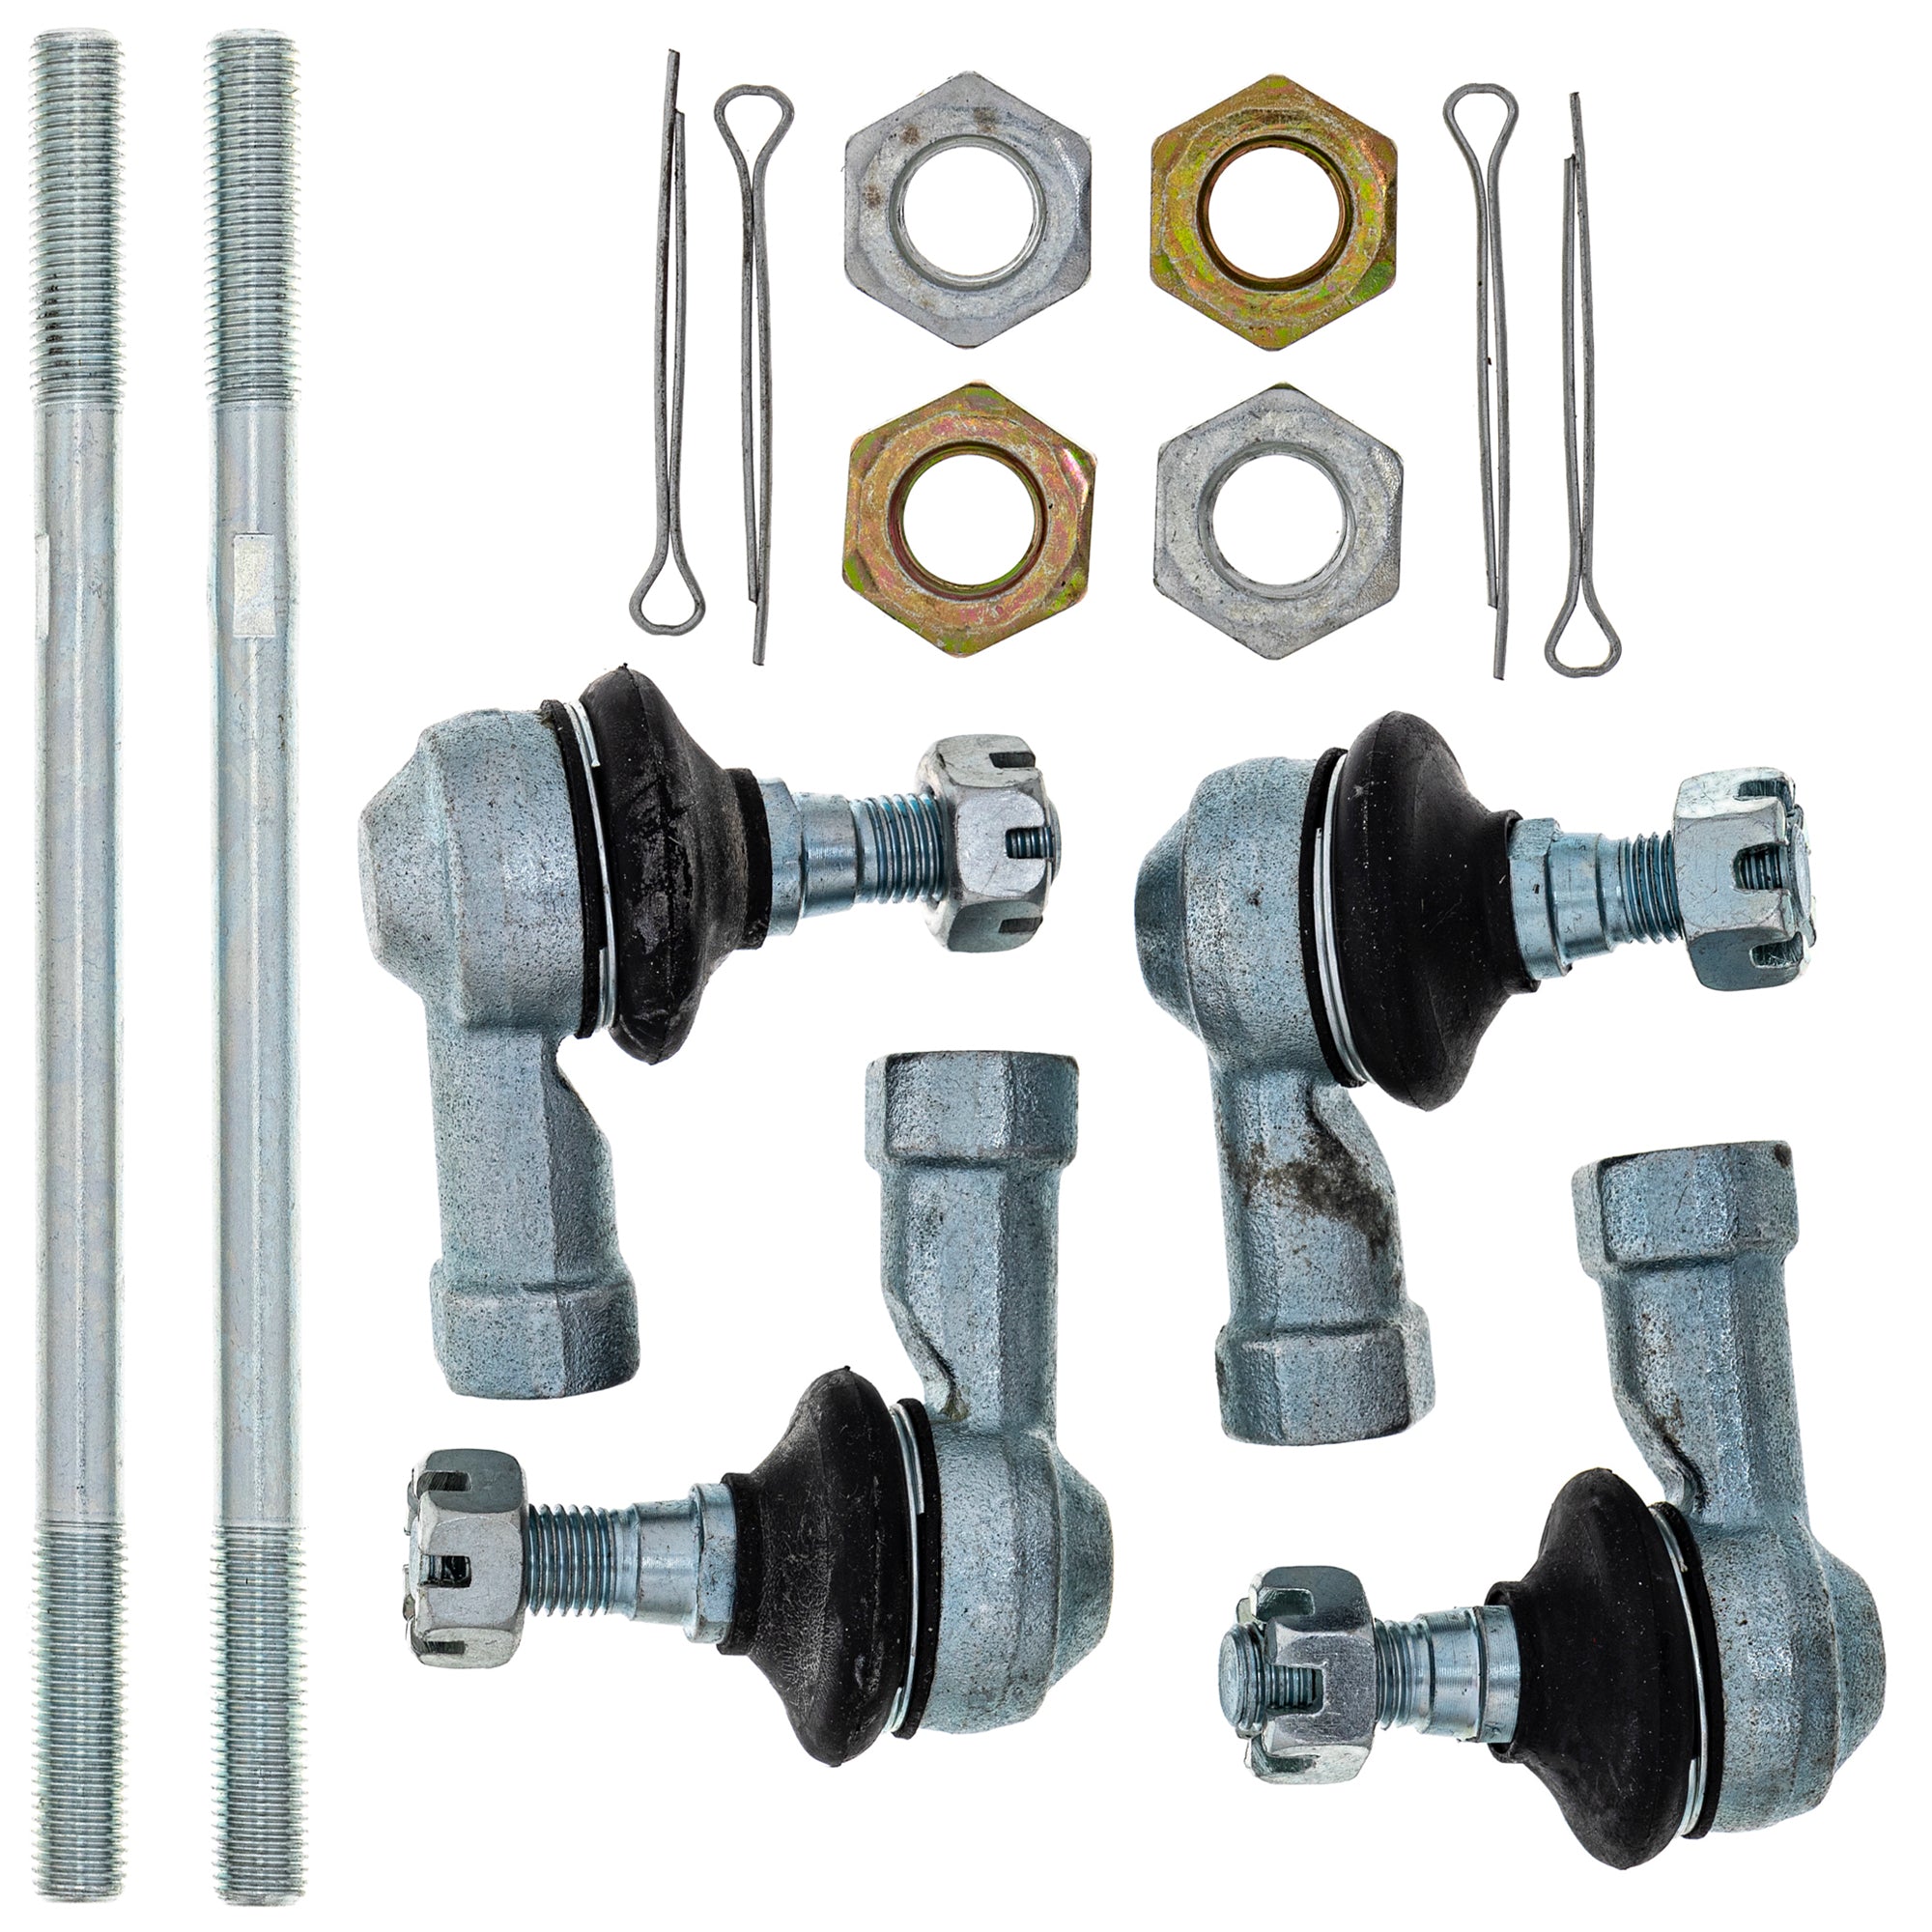 Tie Rods & Tie Rods Ends Kit for Polaris Sportsman Outlaw NICHE MK1006313